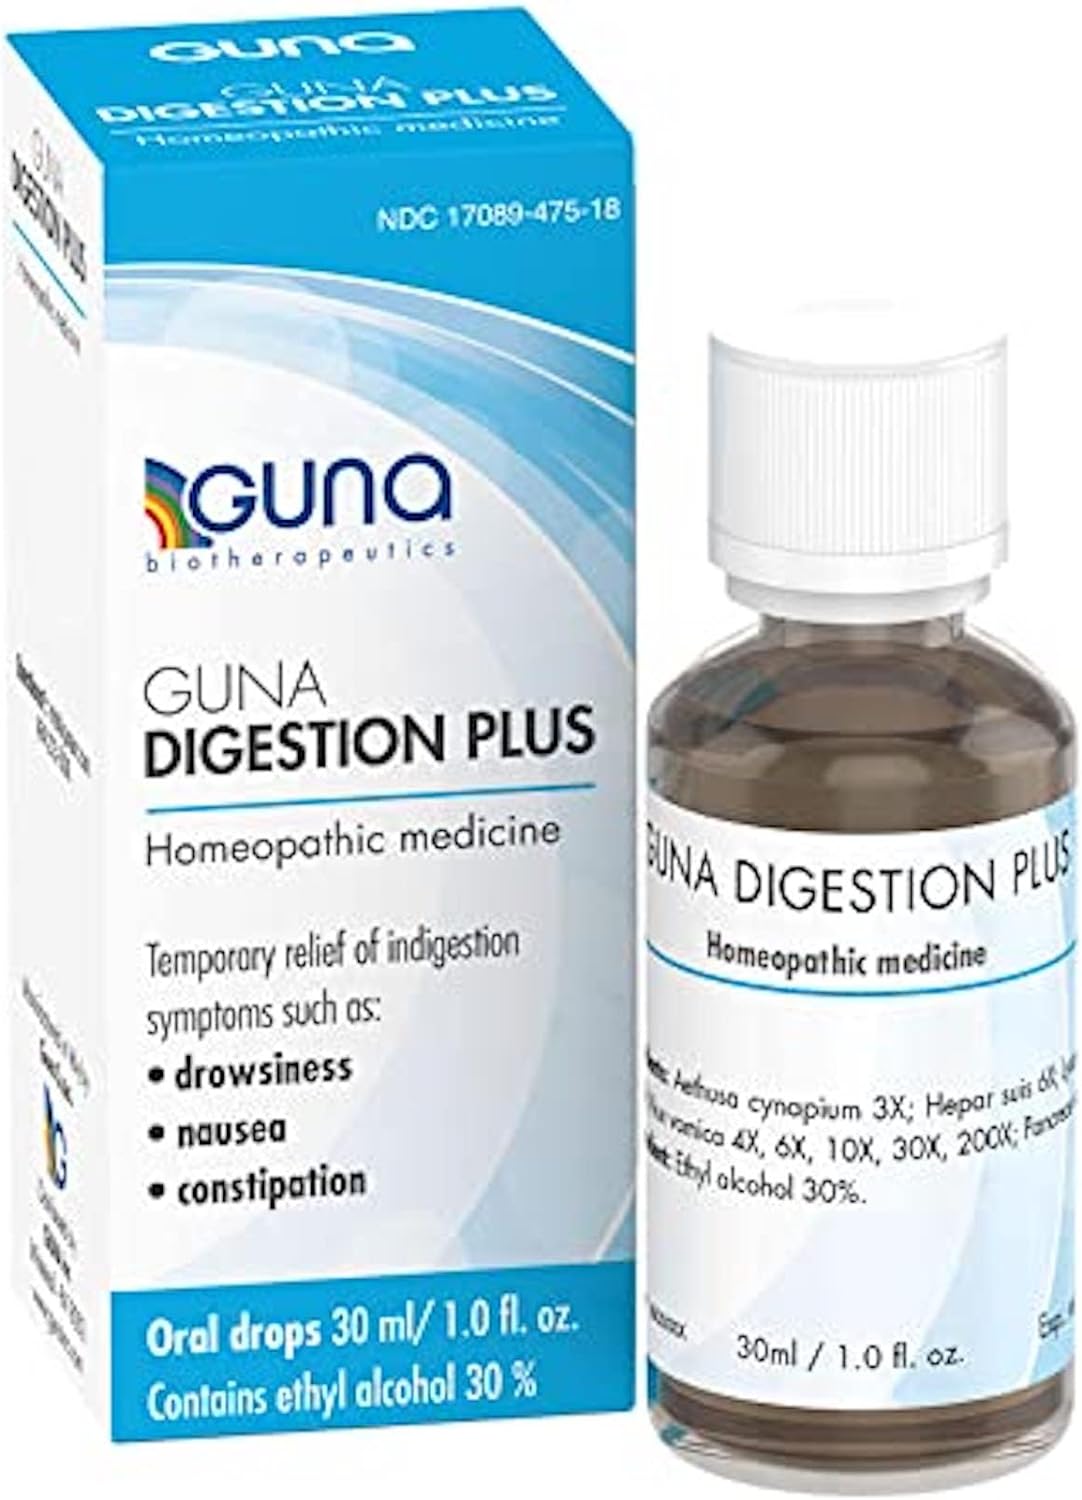 GUNA Digestion Plus Homeopathic Digestive Remedy Helps Digestion Relieves Heartburn and Sour Stomach - 1 Ounce